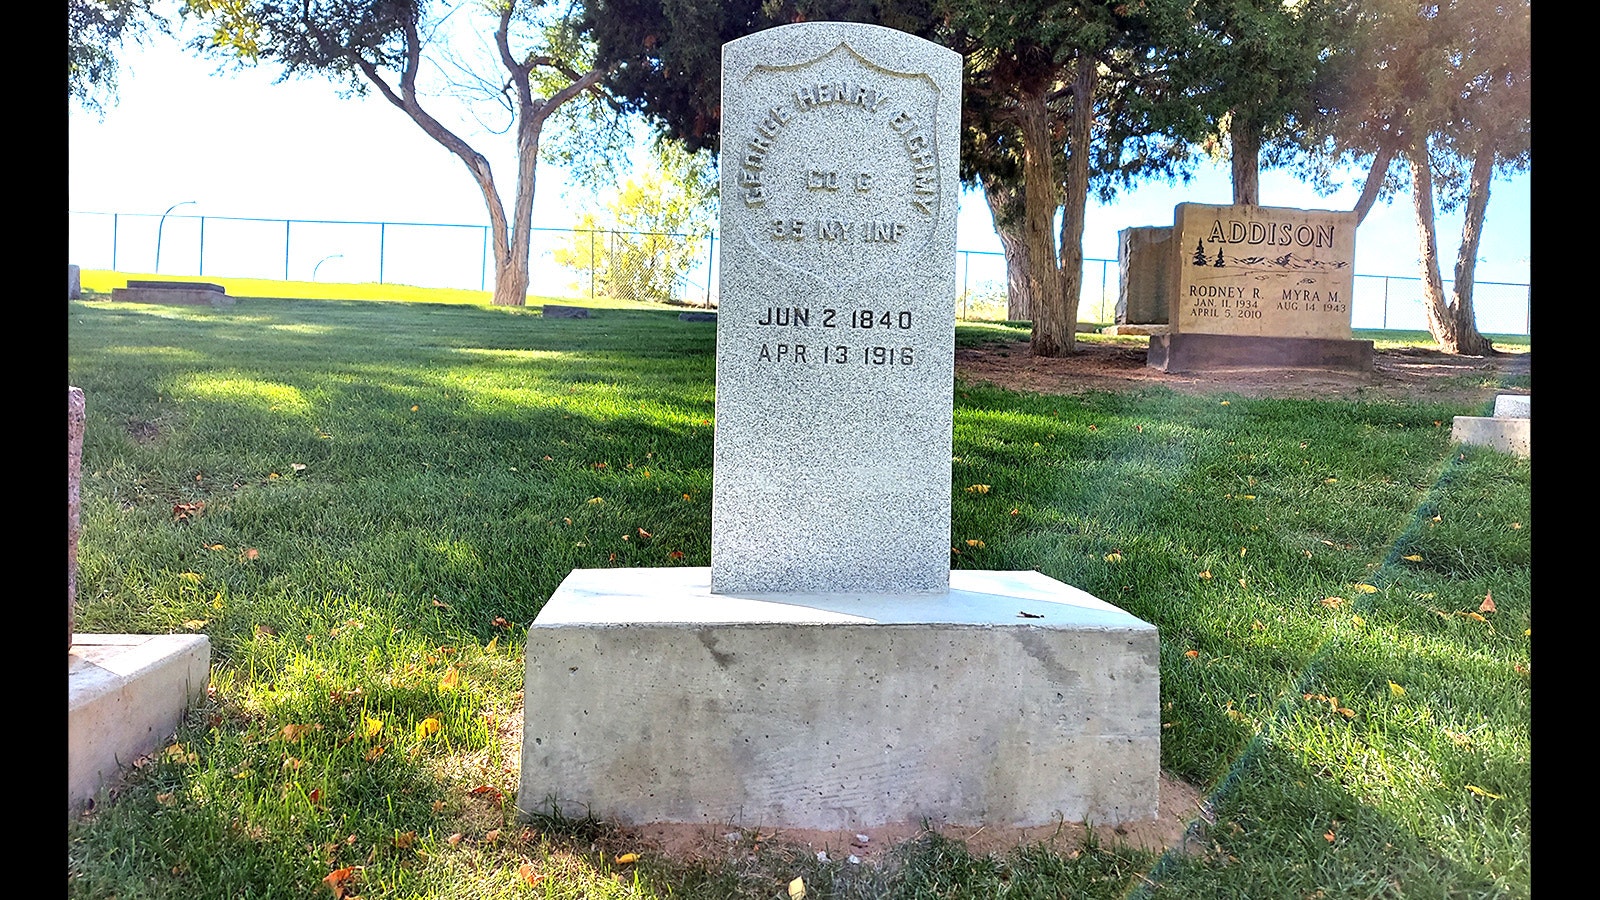 The new headstone for George Henry Eighmy in Mount Pisgah Cemetery in Gillette, Wyoming.